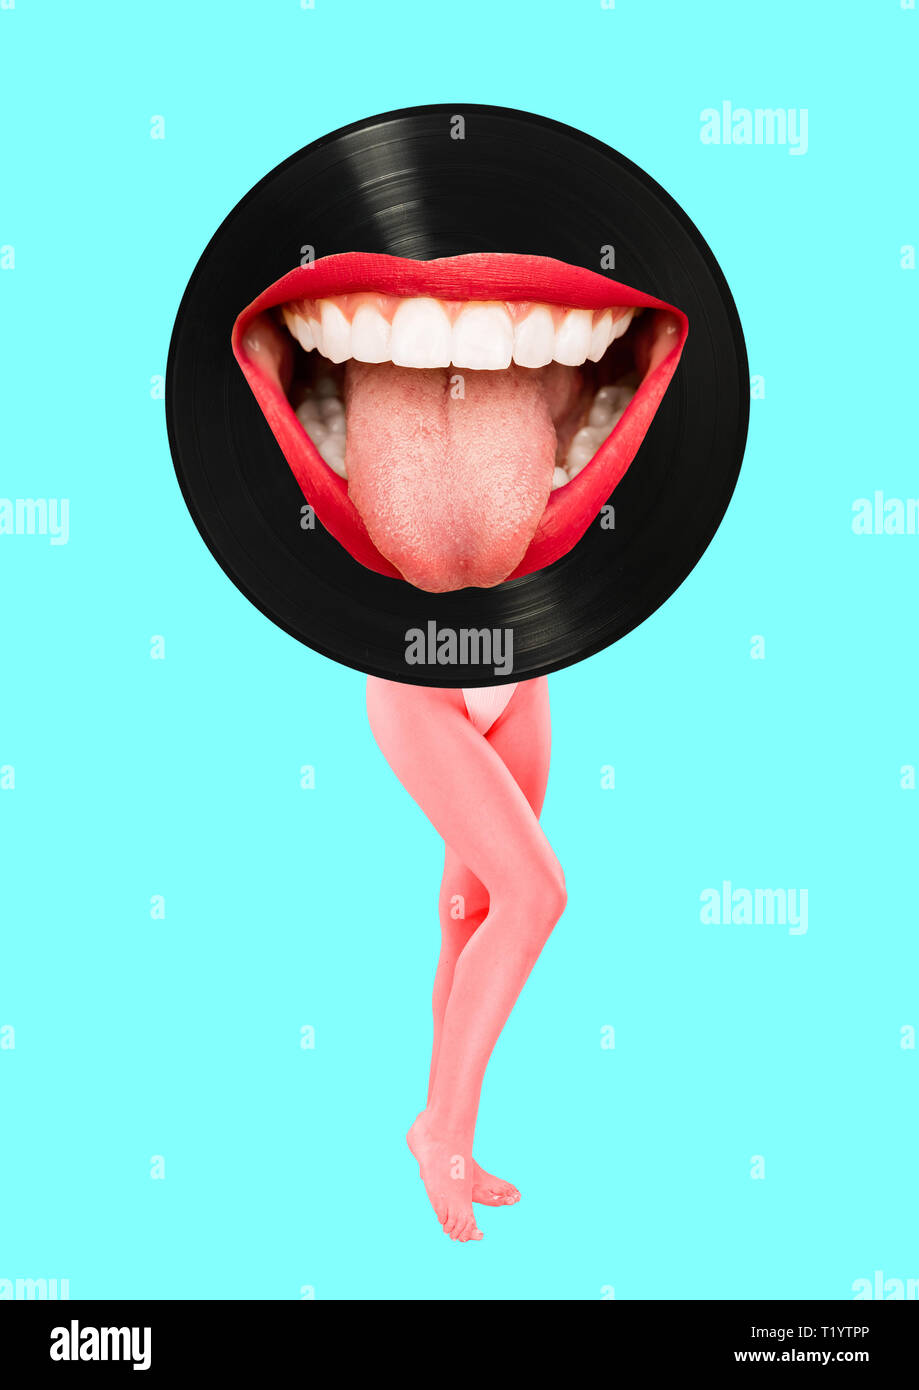 Meloman feeling happieness. Fit female legs headed by vinyl record with big mouth. Ideal hollywood smile, red lips. Retro, oldschool style. Music concept. Modern design. Contemporary art collage. Stock Photo